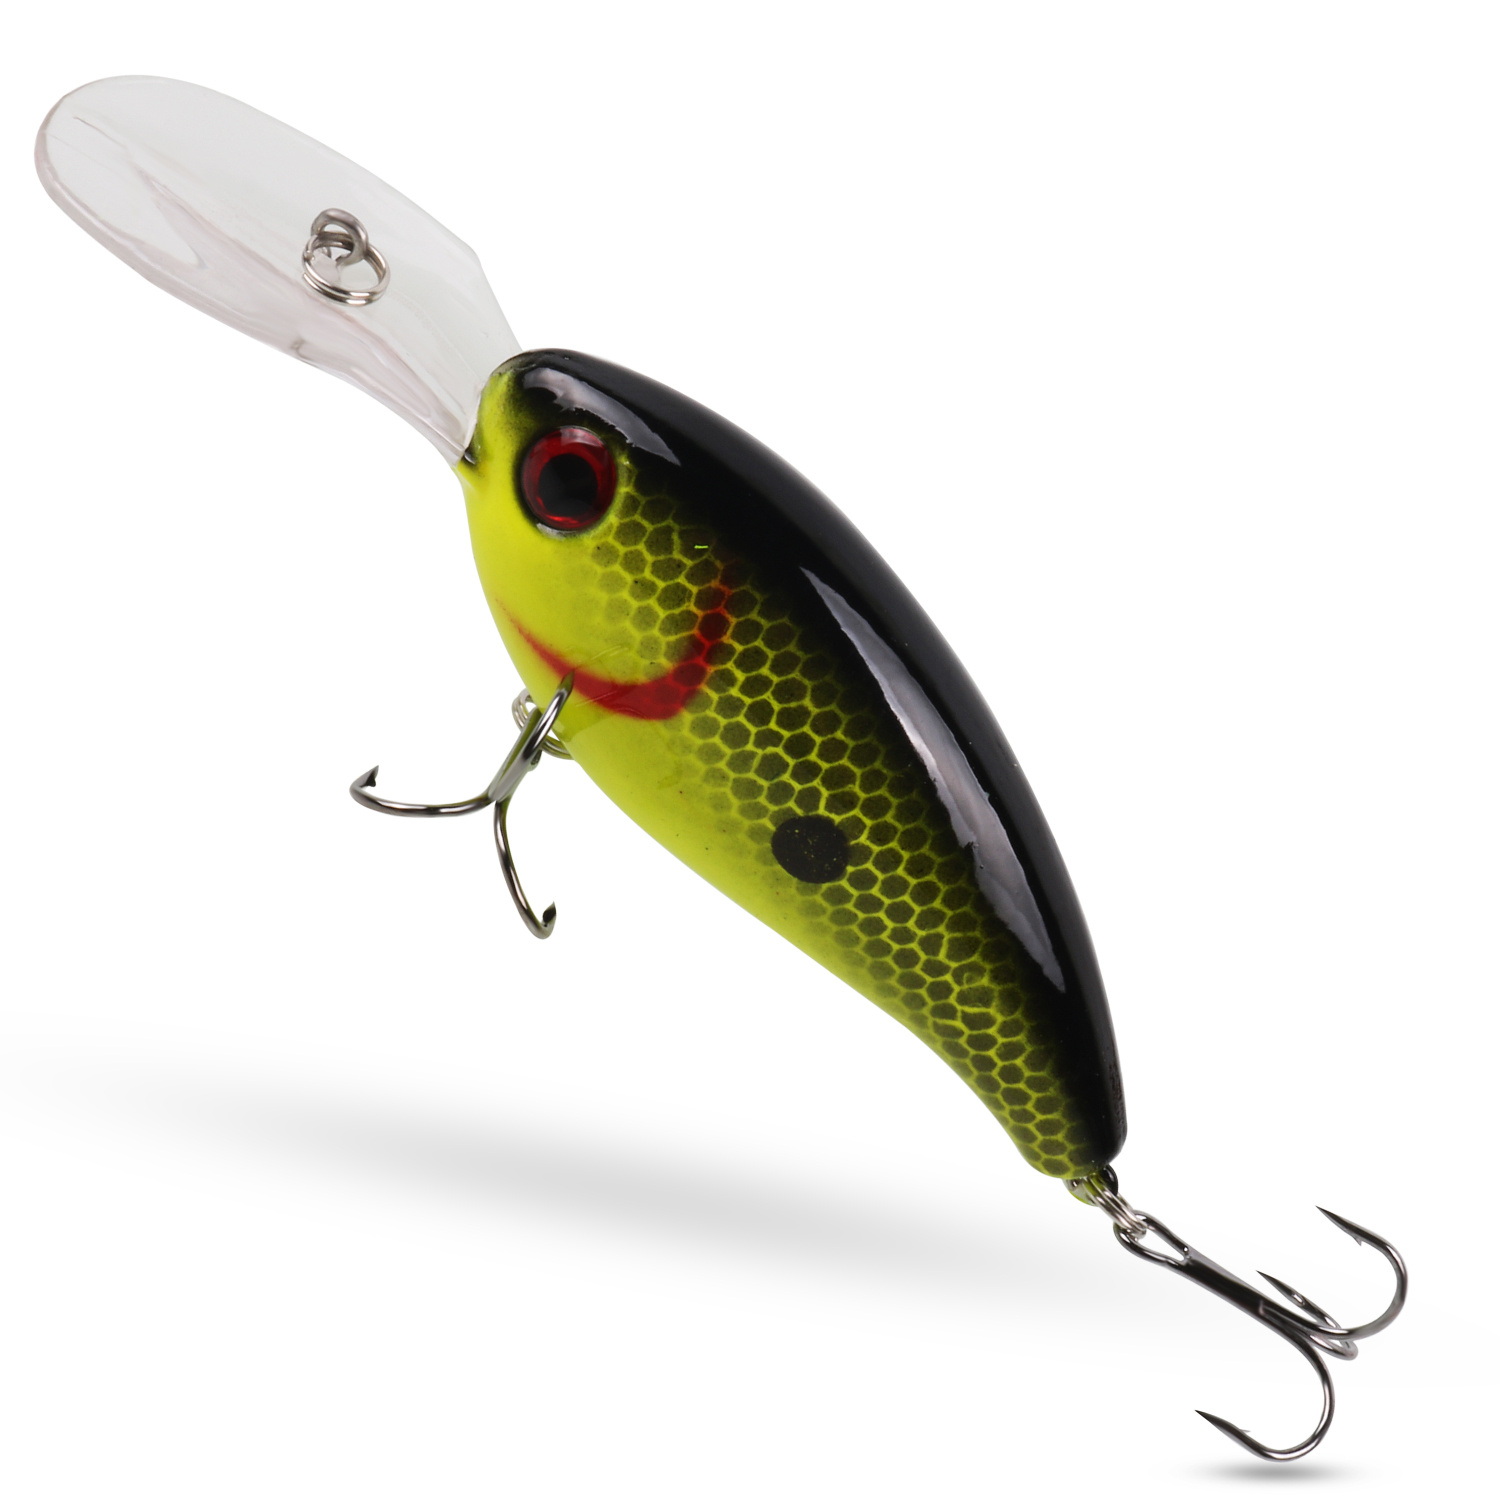 SOUGAYILANG 1pc Crankbait Fishing Lure, Simulating Artificial Hard Bait *  Lure, Fishing Gear For Bass Trout Freshwater Saltwater